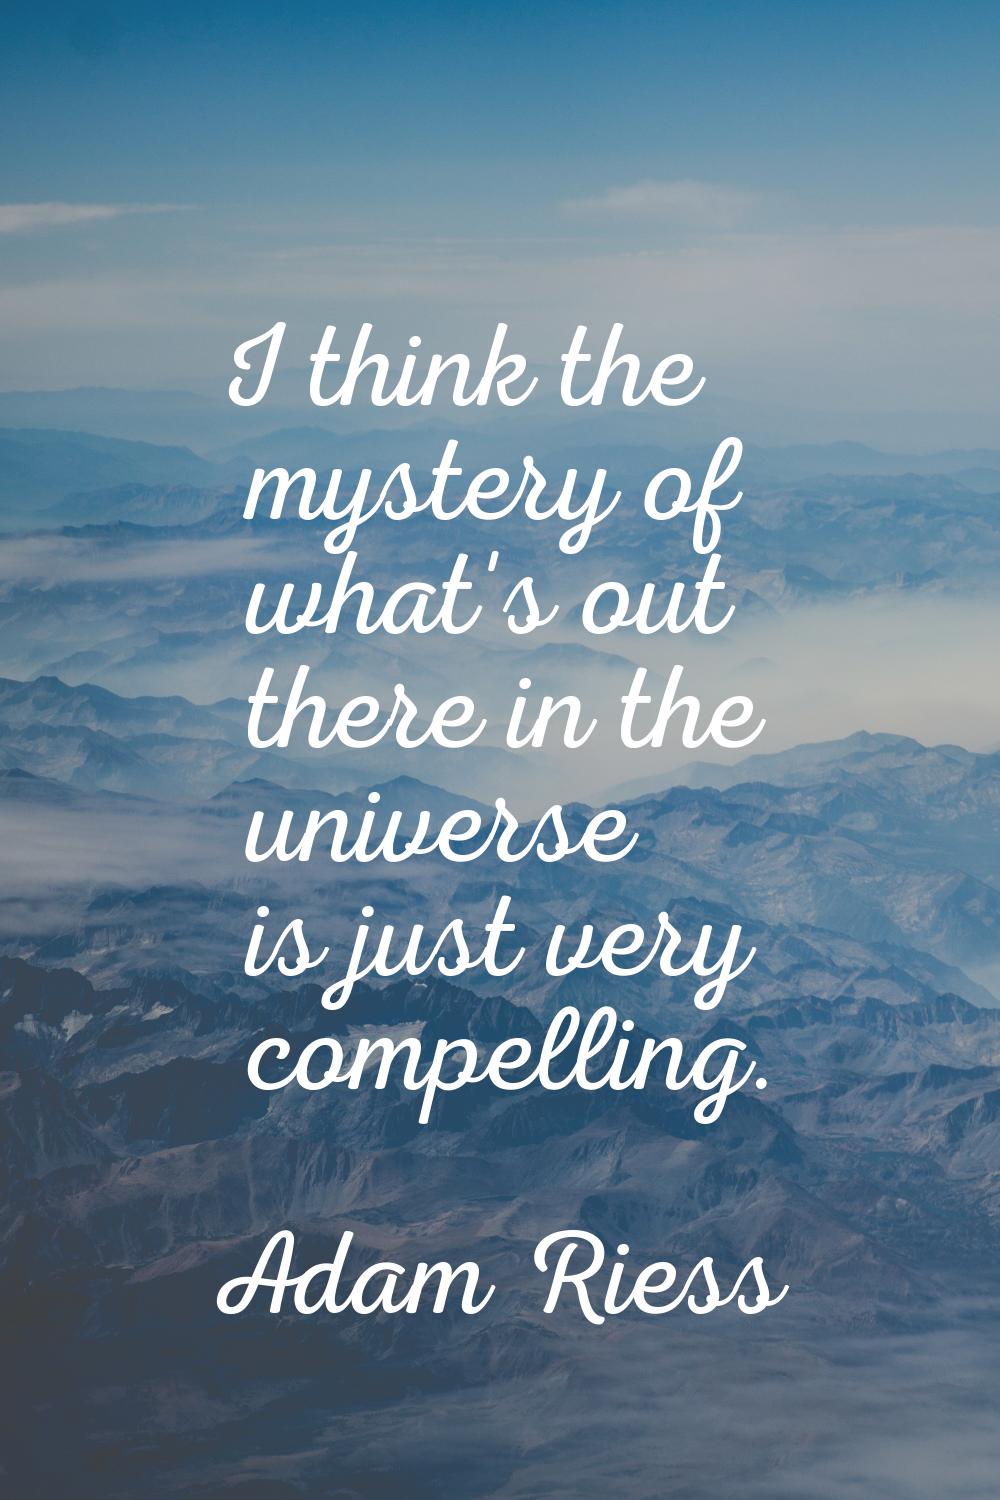 I think the mystery of what's out there in the universe is just very compelling.